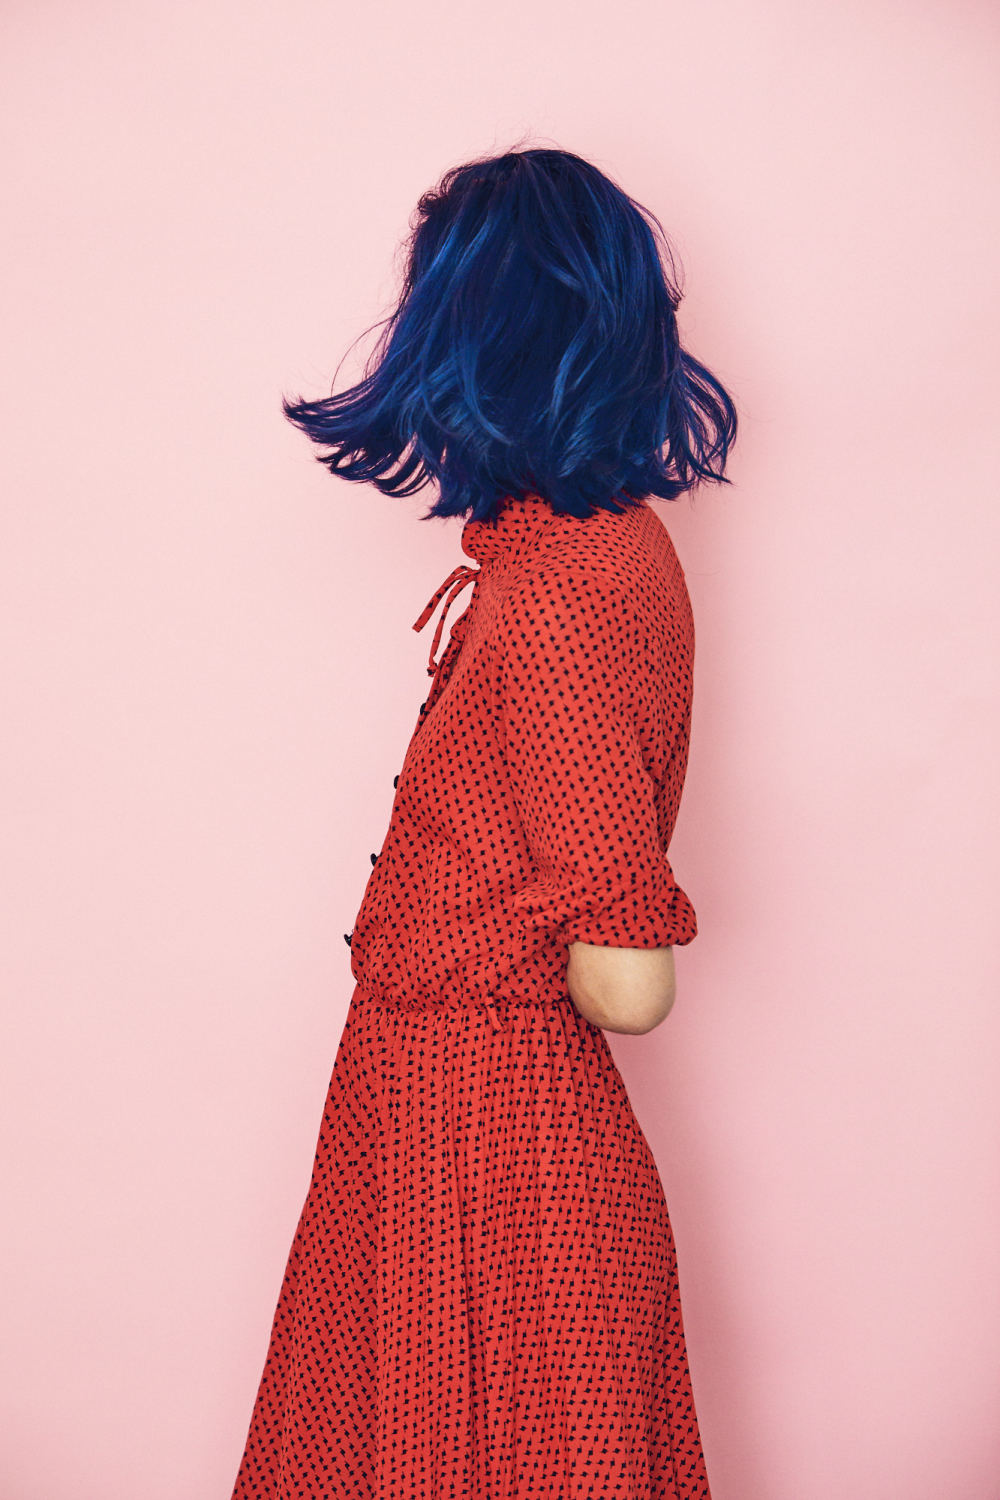 RED DRESS BLUE HAIR PINK WALL